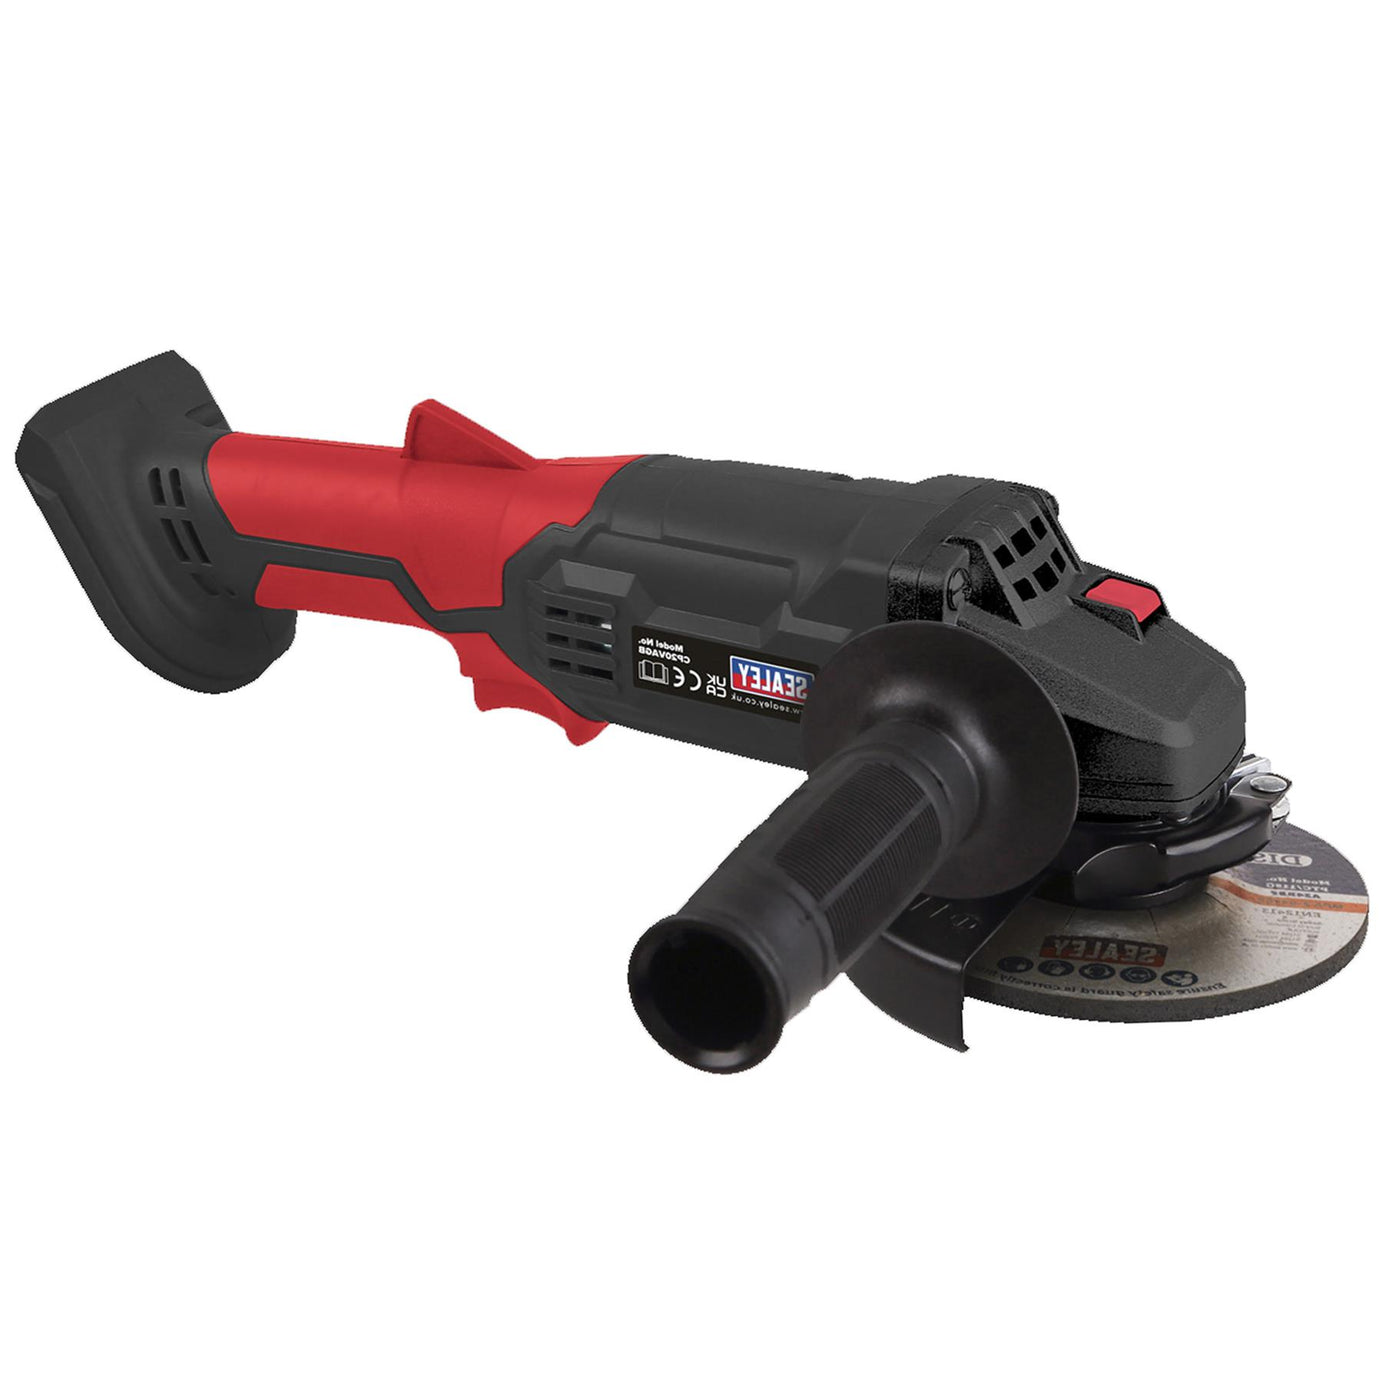 Sealey Cordless Angle Grinder 115mm 20V - Body Only